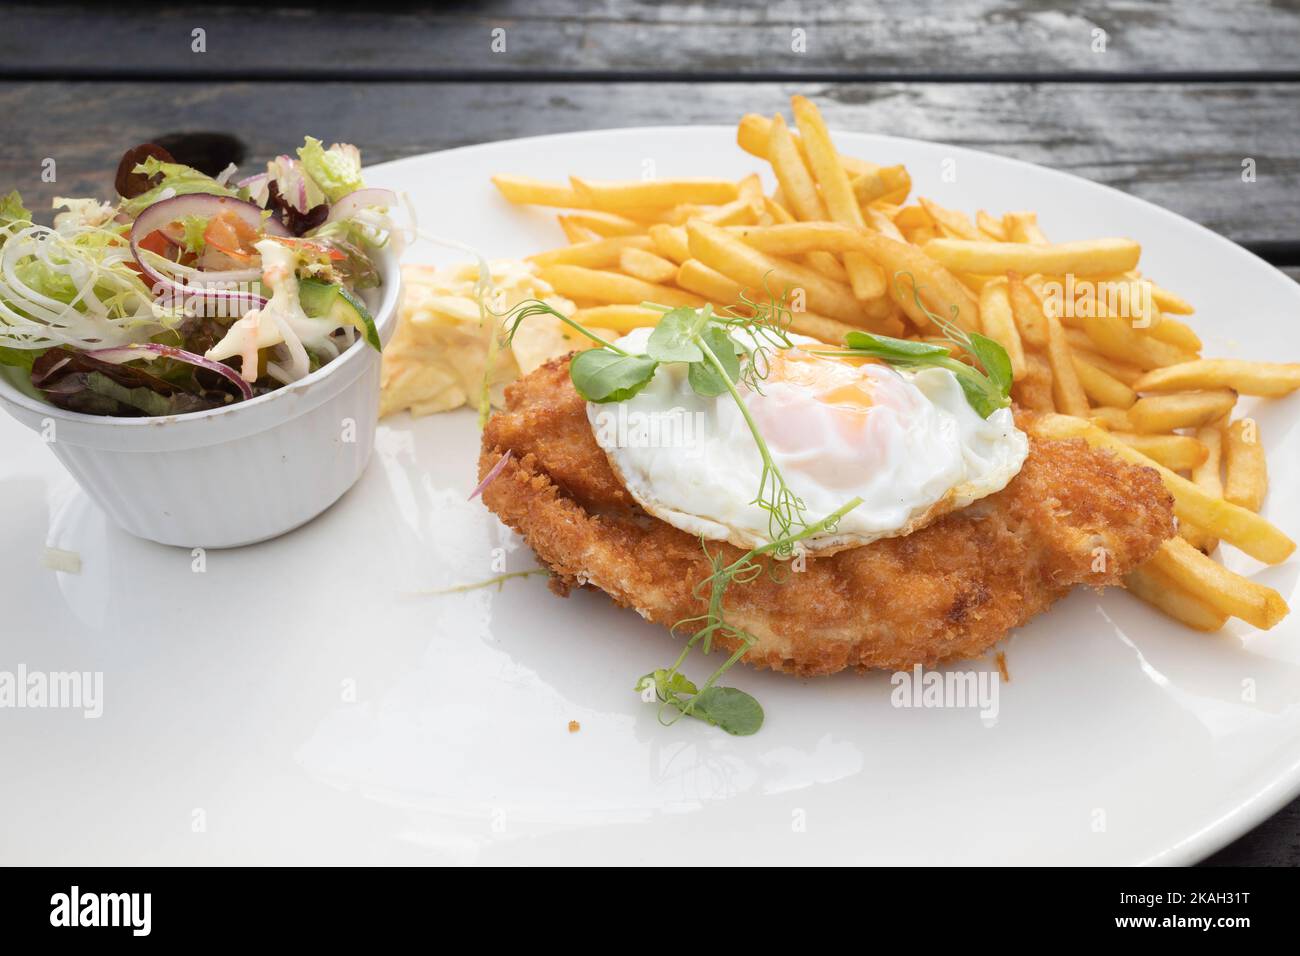 Lord Stones Café  lunch  Chicken Milanese with fries coleslaw and mixes leaves salad with a fried egg on top Stock Photo